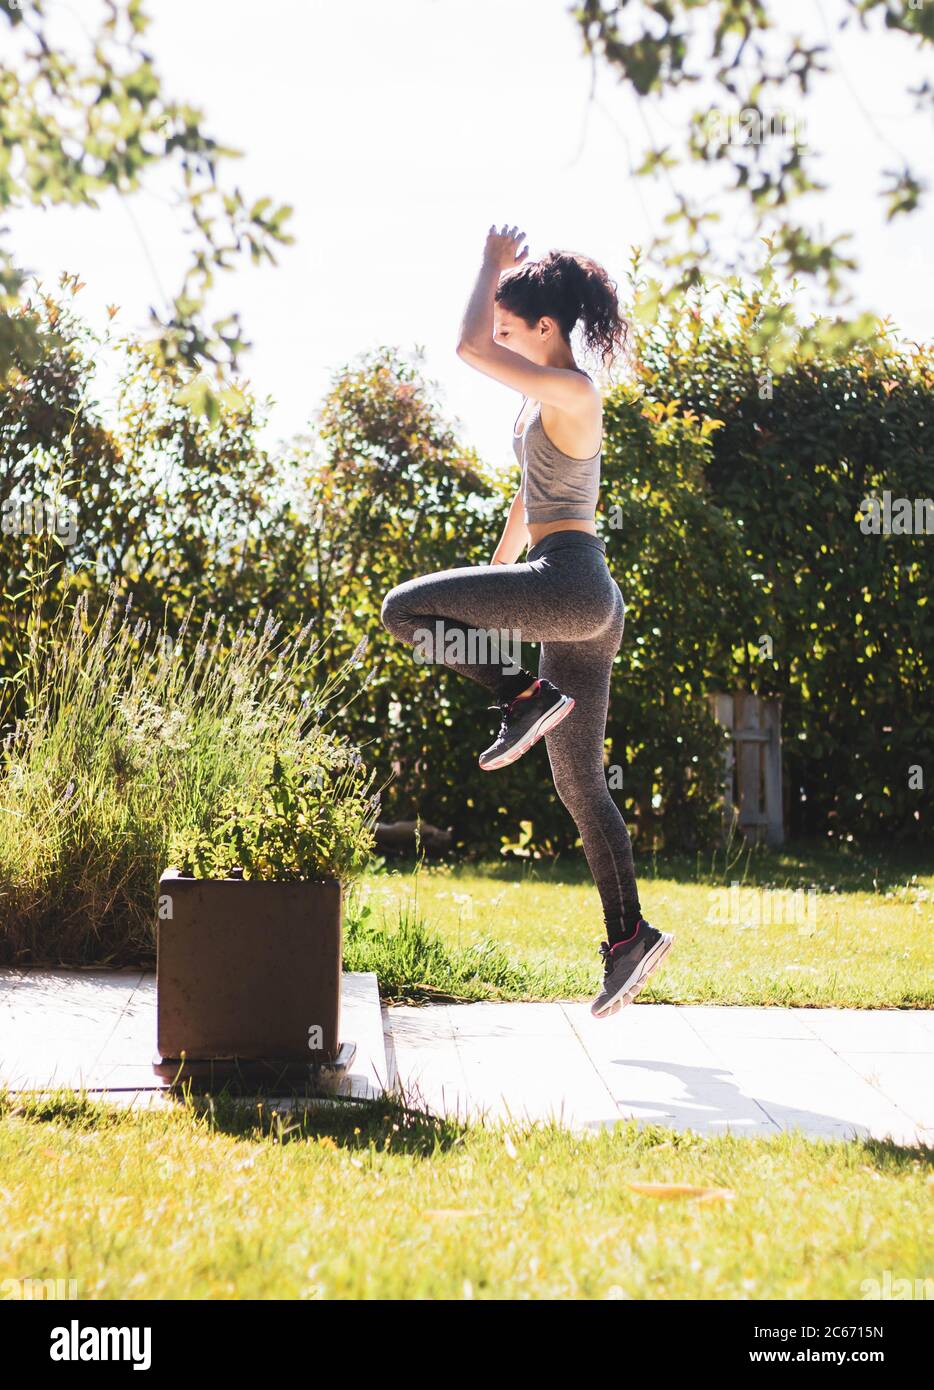 young woman exercising in her home garden Stock Photo